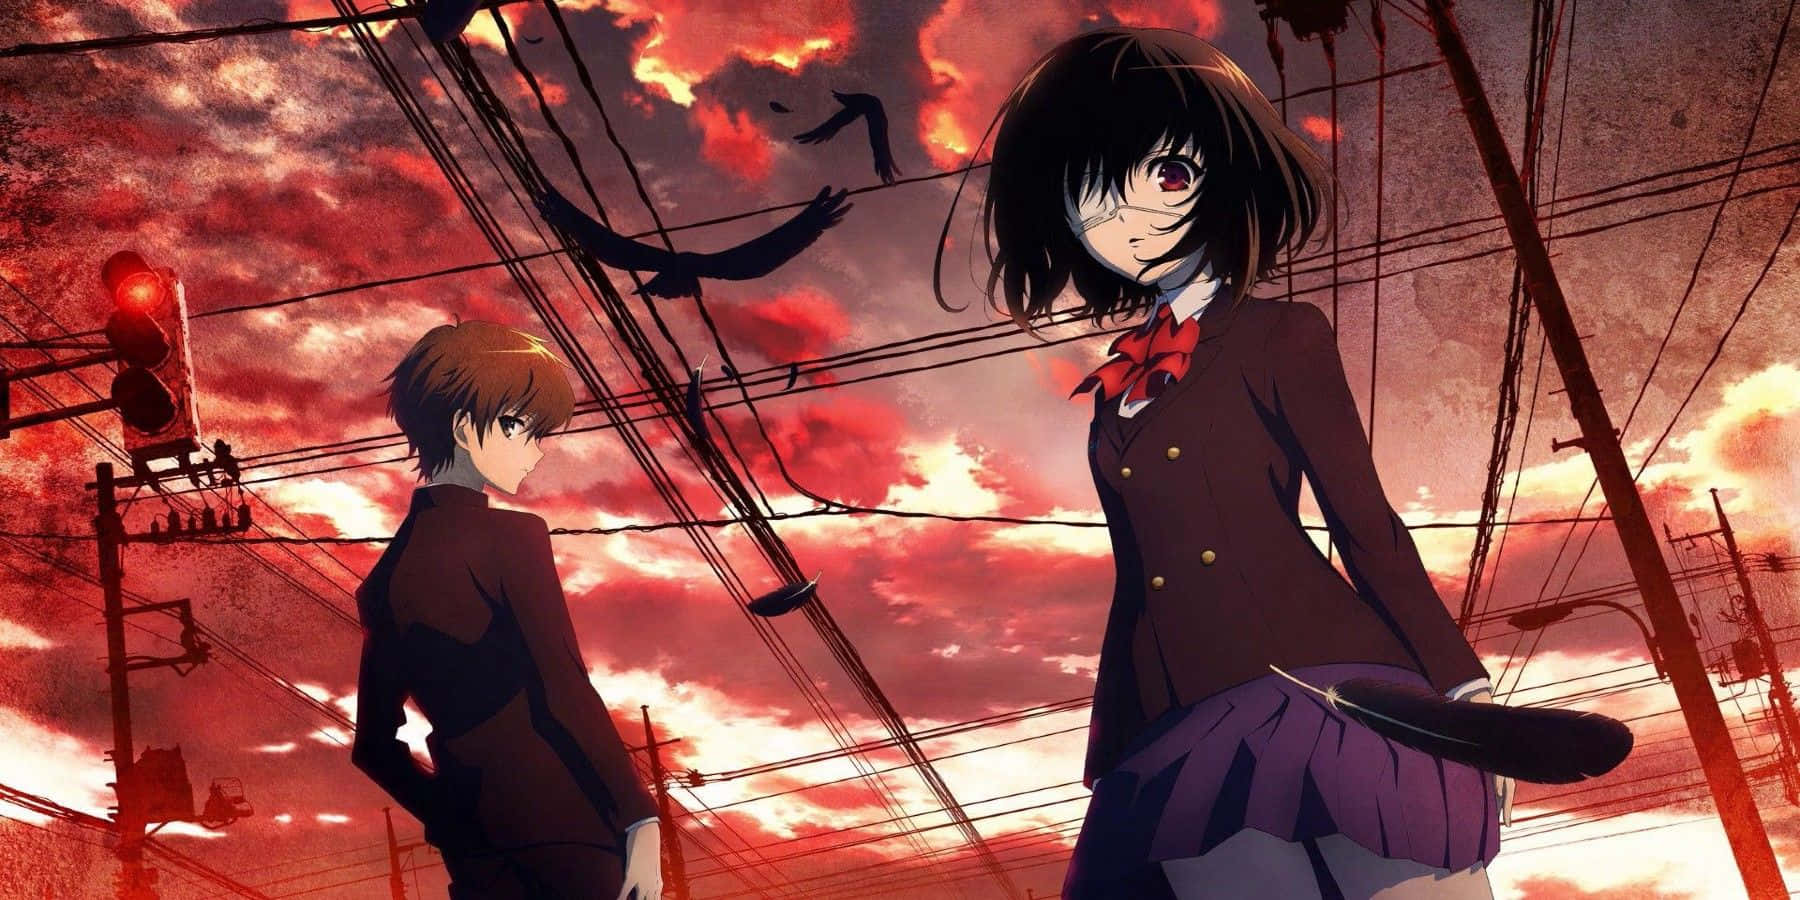 Anime, A Girl And A Boy Standing In A Street